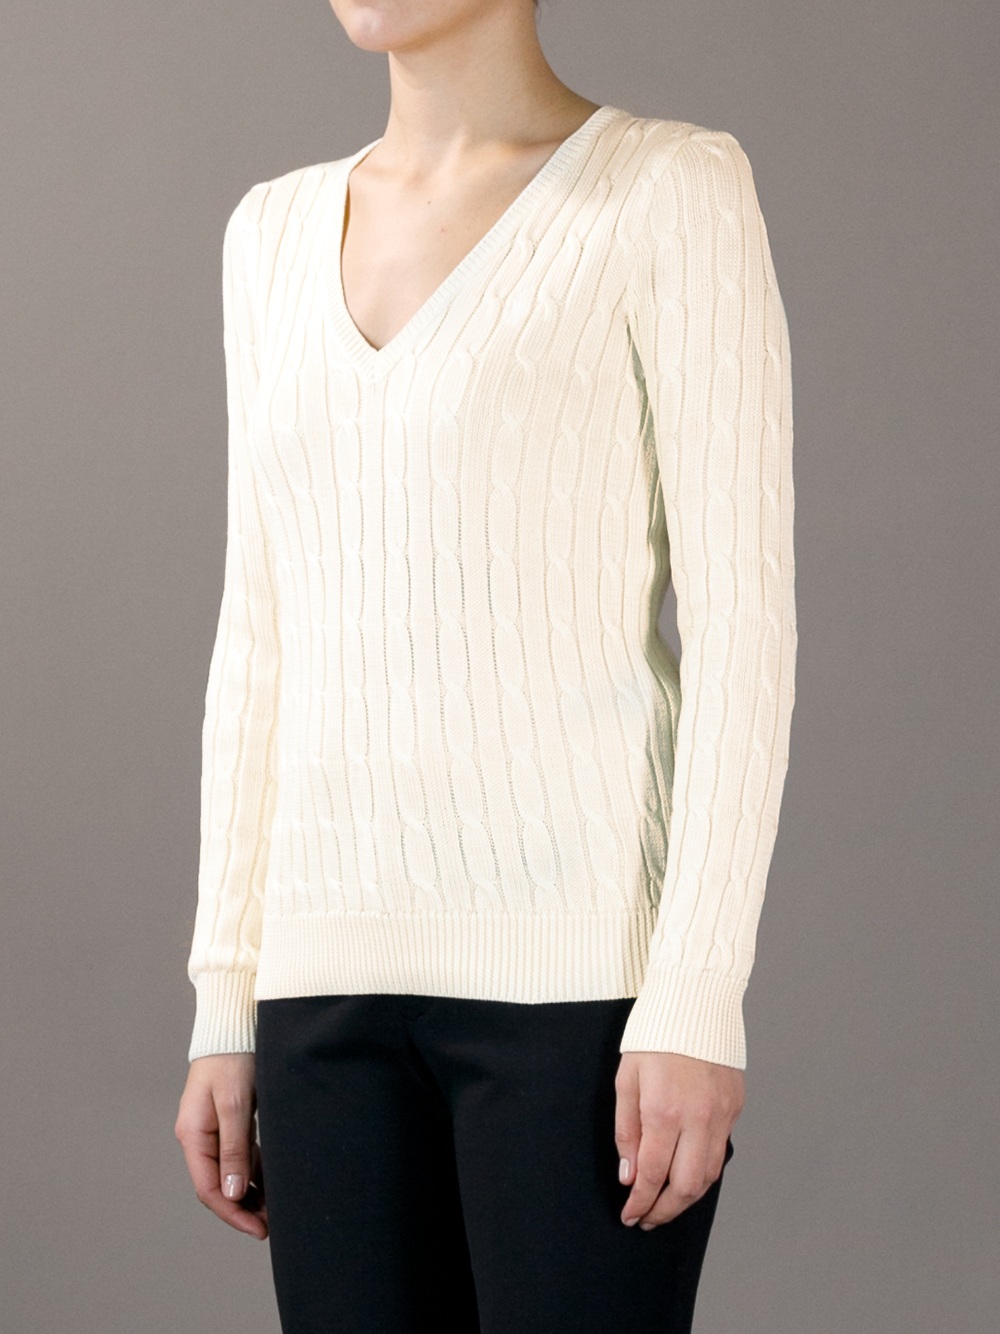 Ralph Lauren V-neck Cable Knit Sweater in Cream (Natural) - Lyst